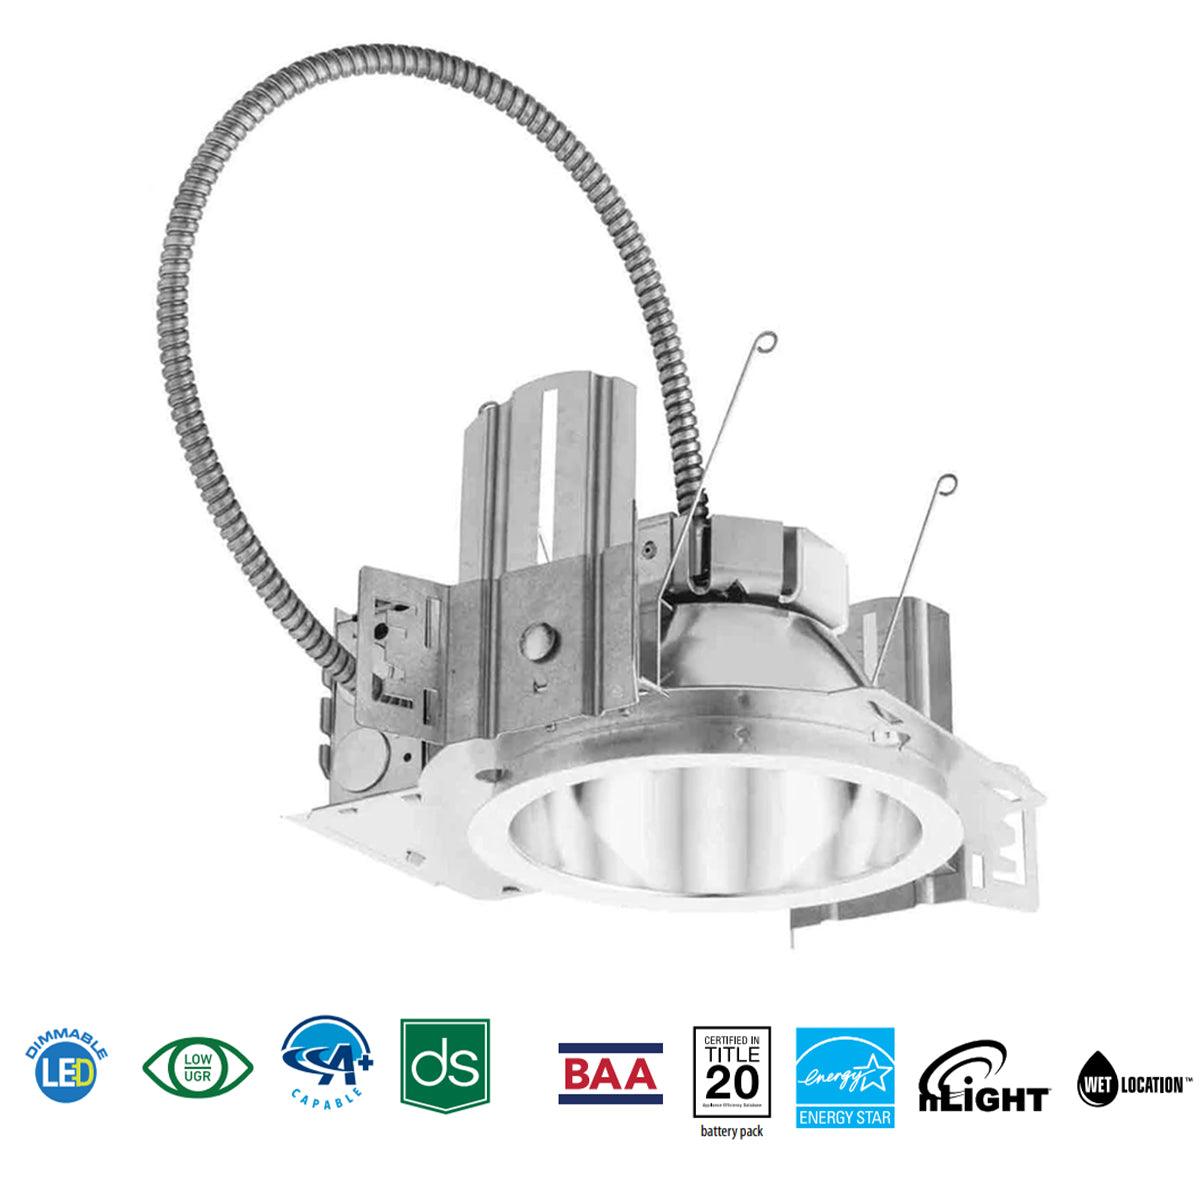 Lithonia LDN6 Commercial LED Recessed Downlight, 1000 lumens, 3500K (Reflector Sold Separately) - Bees Lighting